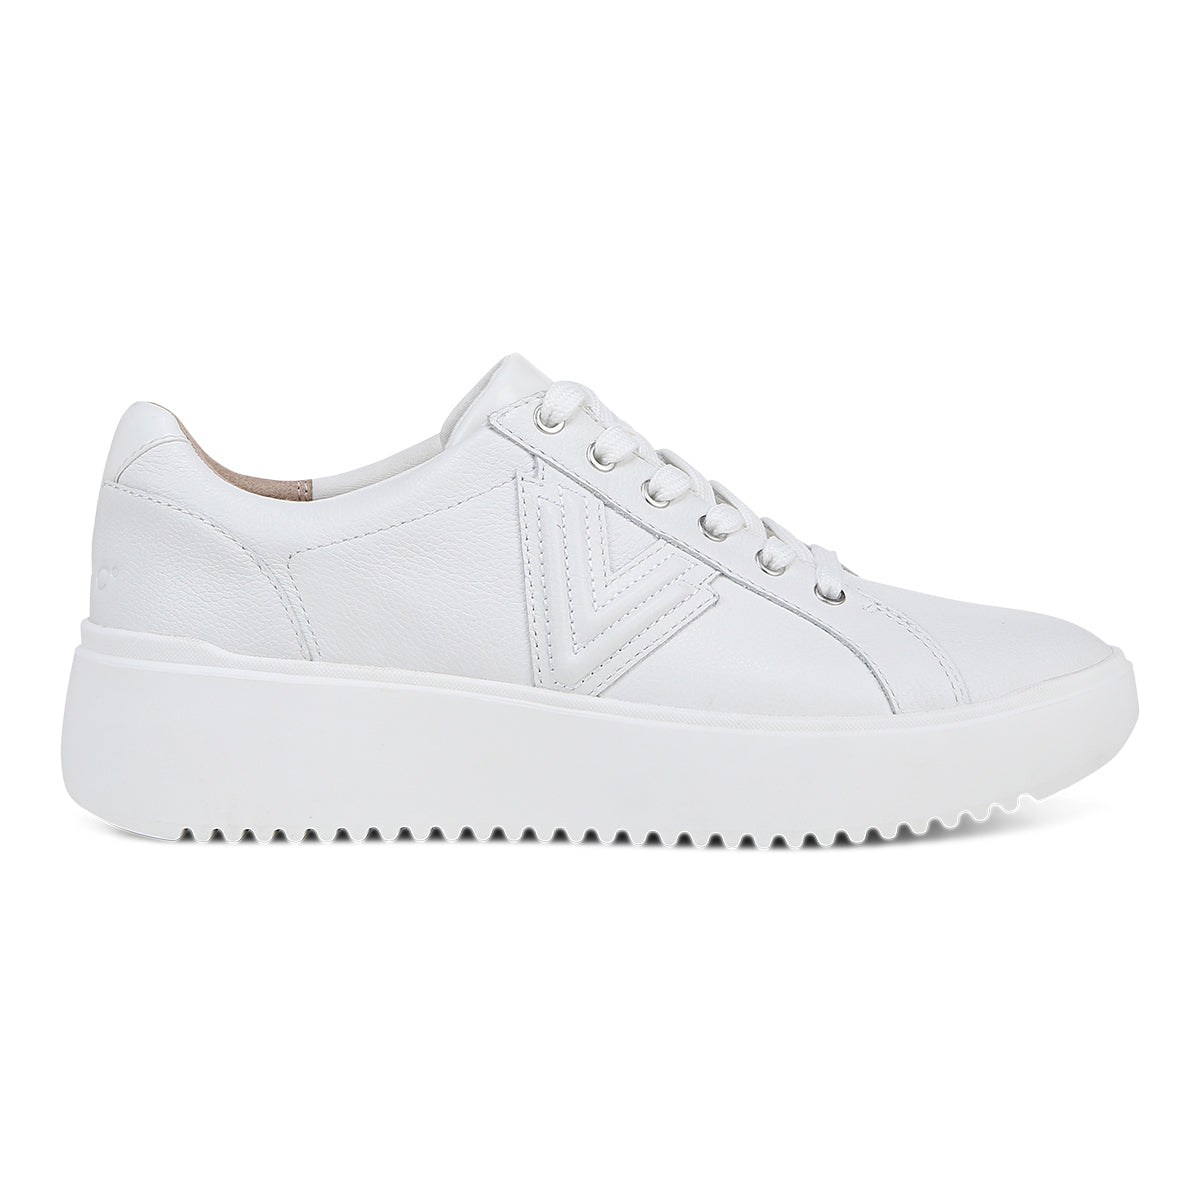 WHITE LEATHER | Right